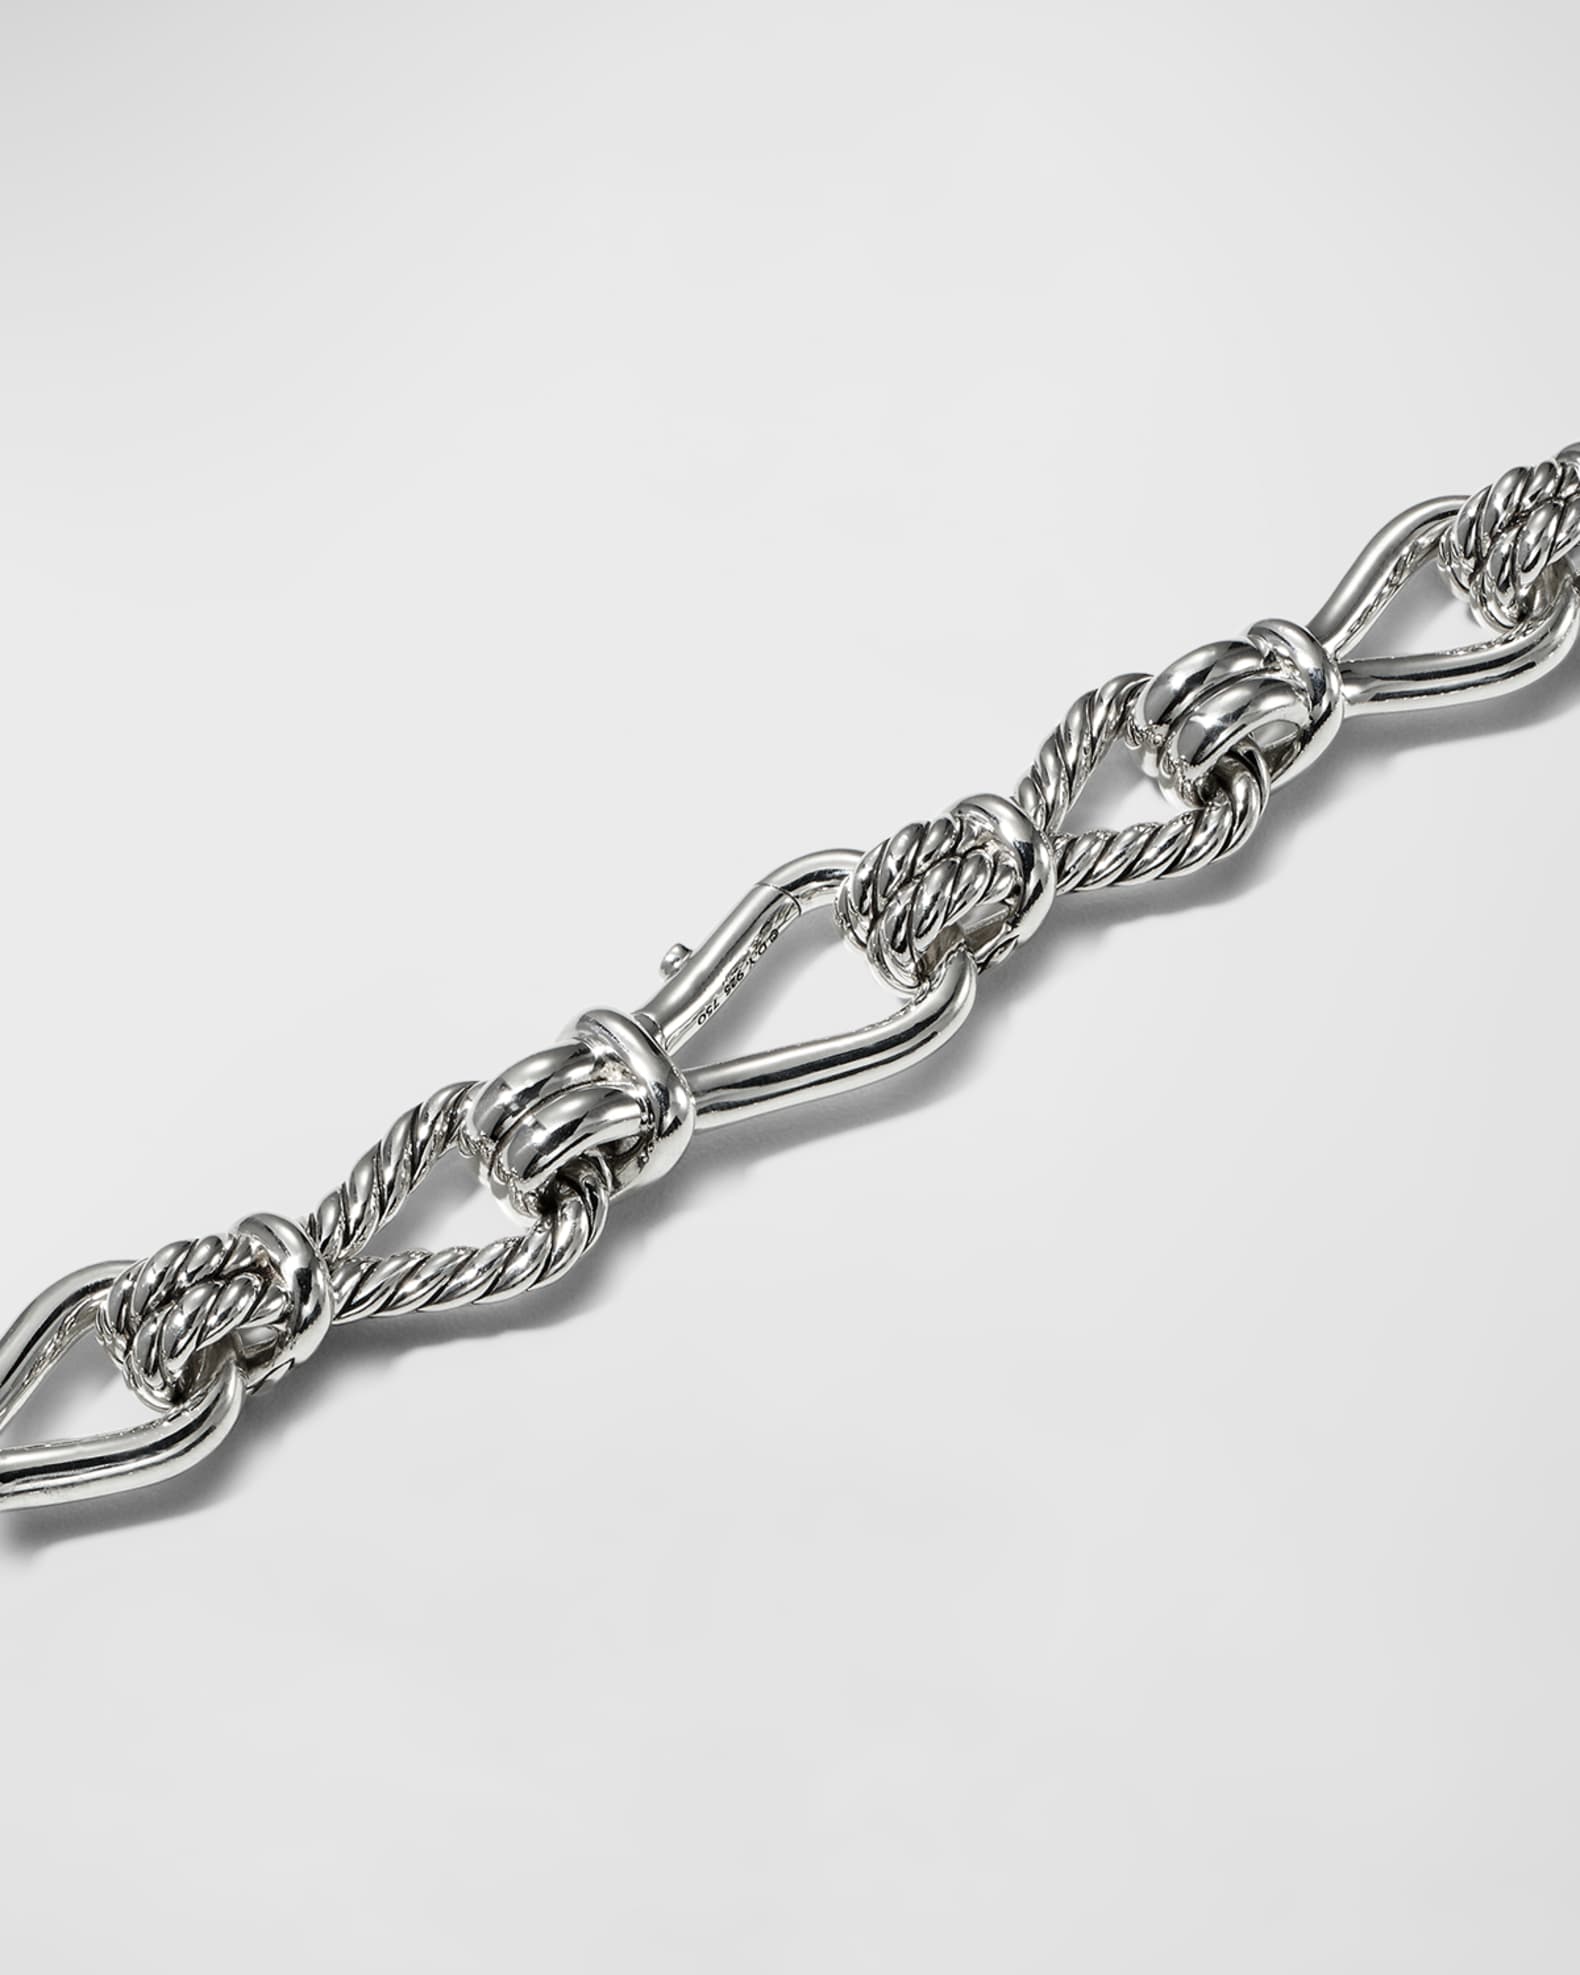 David Yurman 15mm Thoroughbred Loop Linked Chain Necklace in Silver and ...